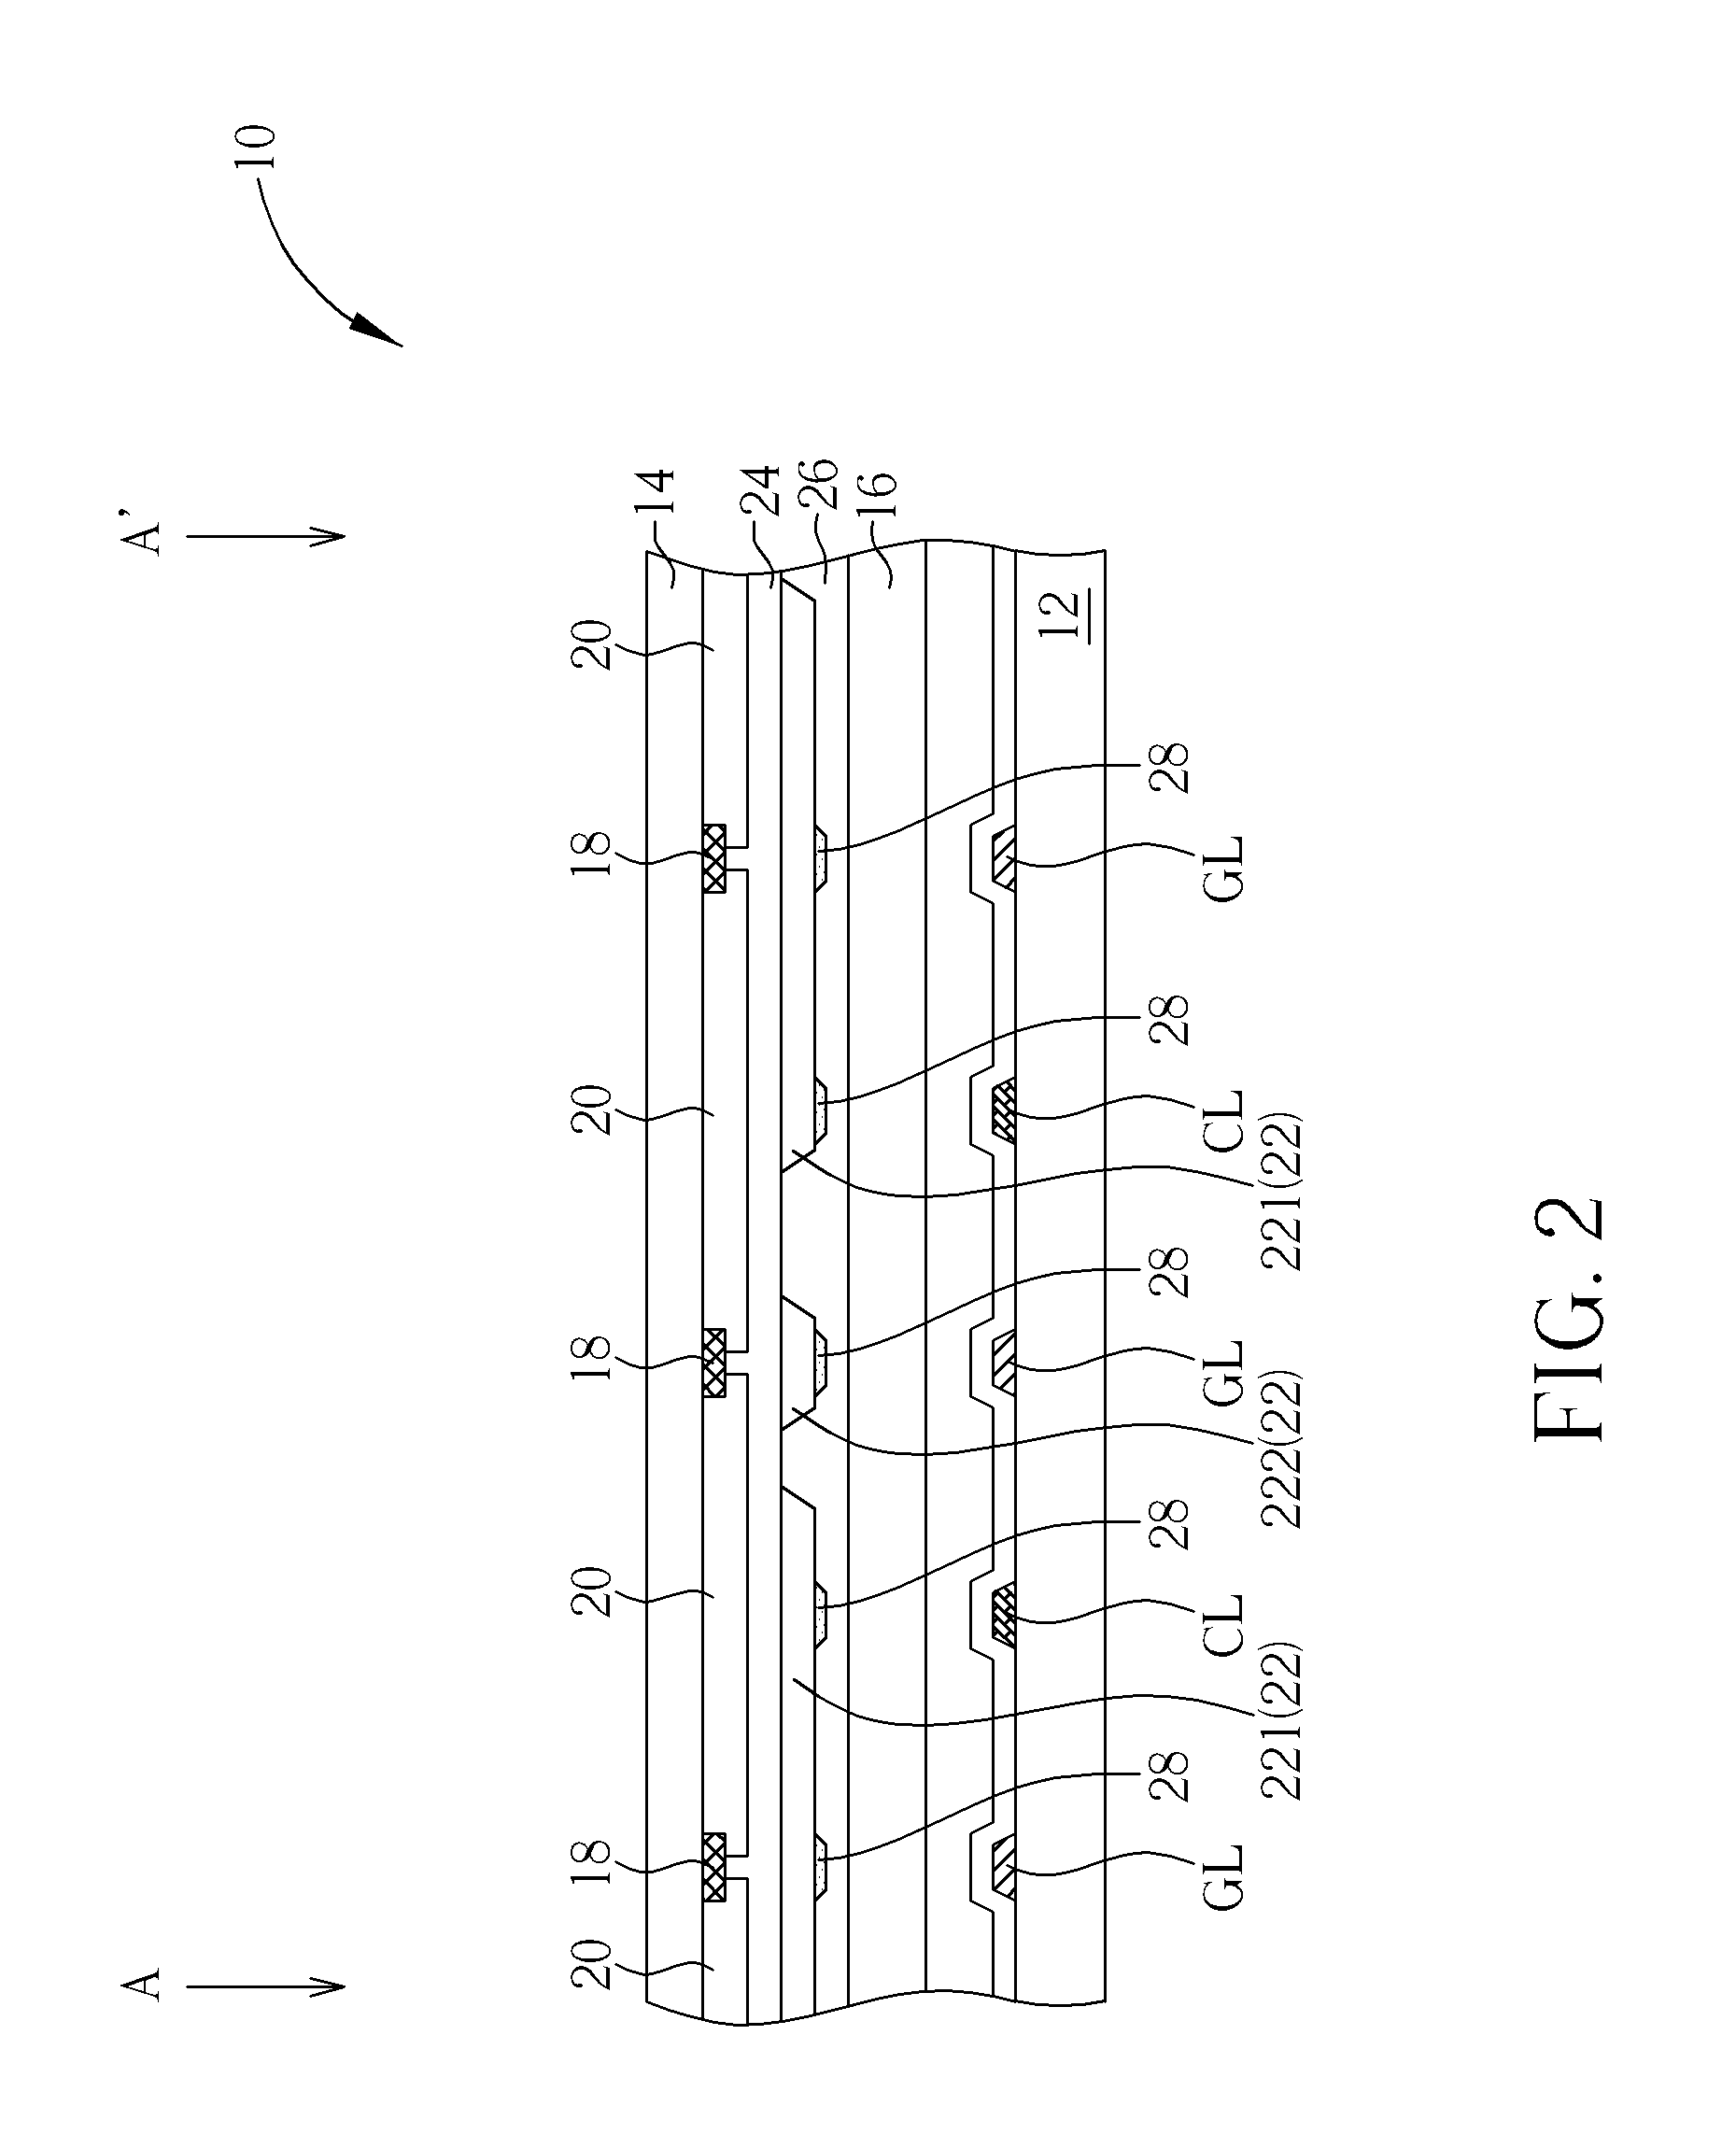 Capacitive touch display panel